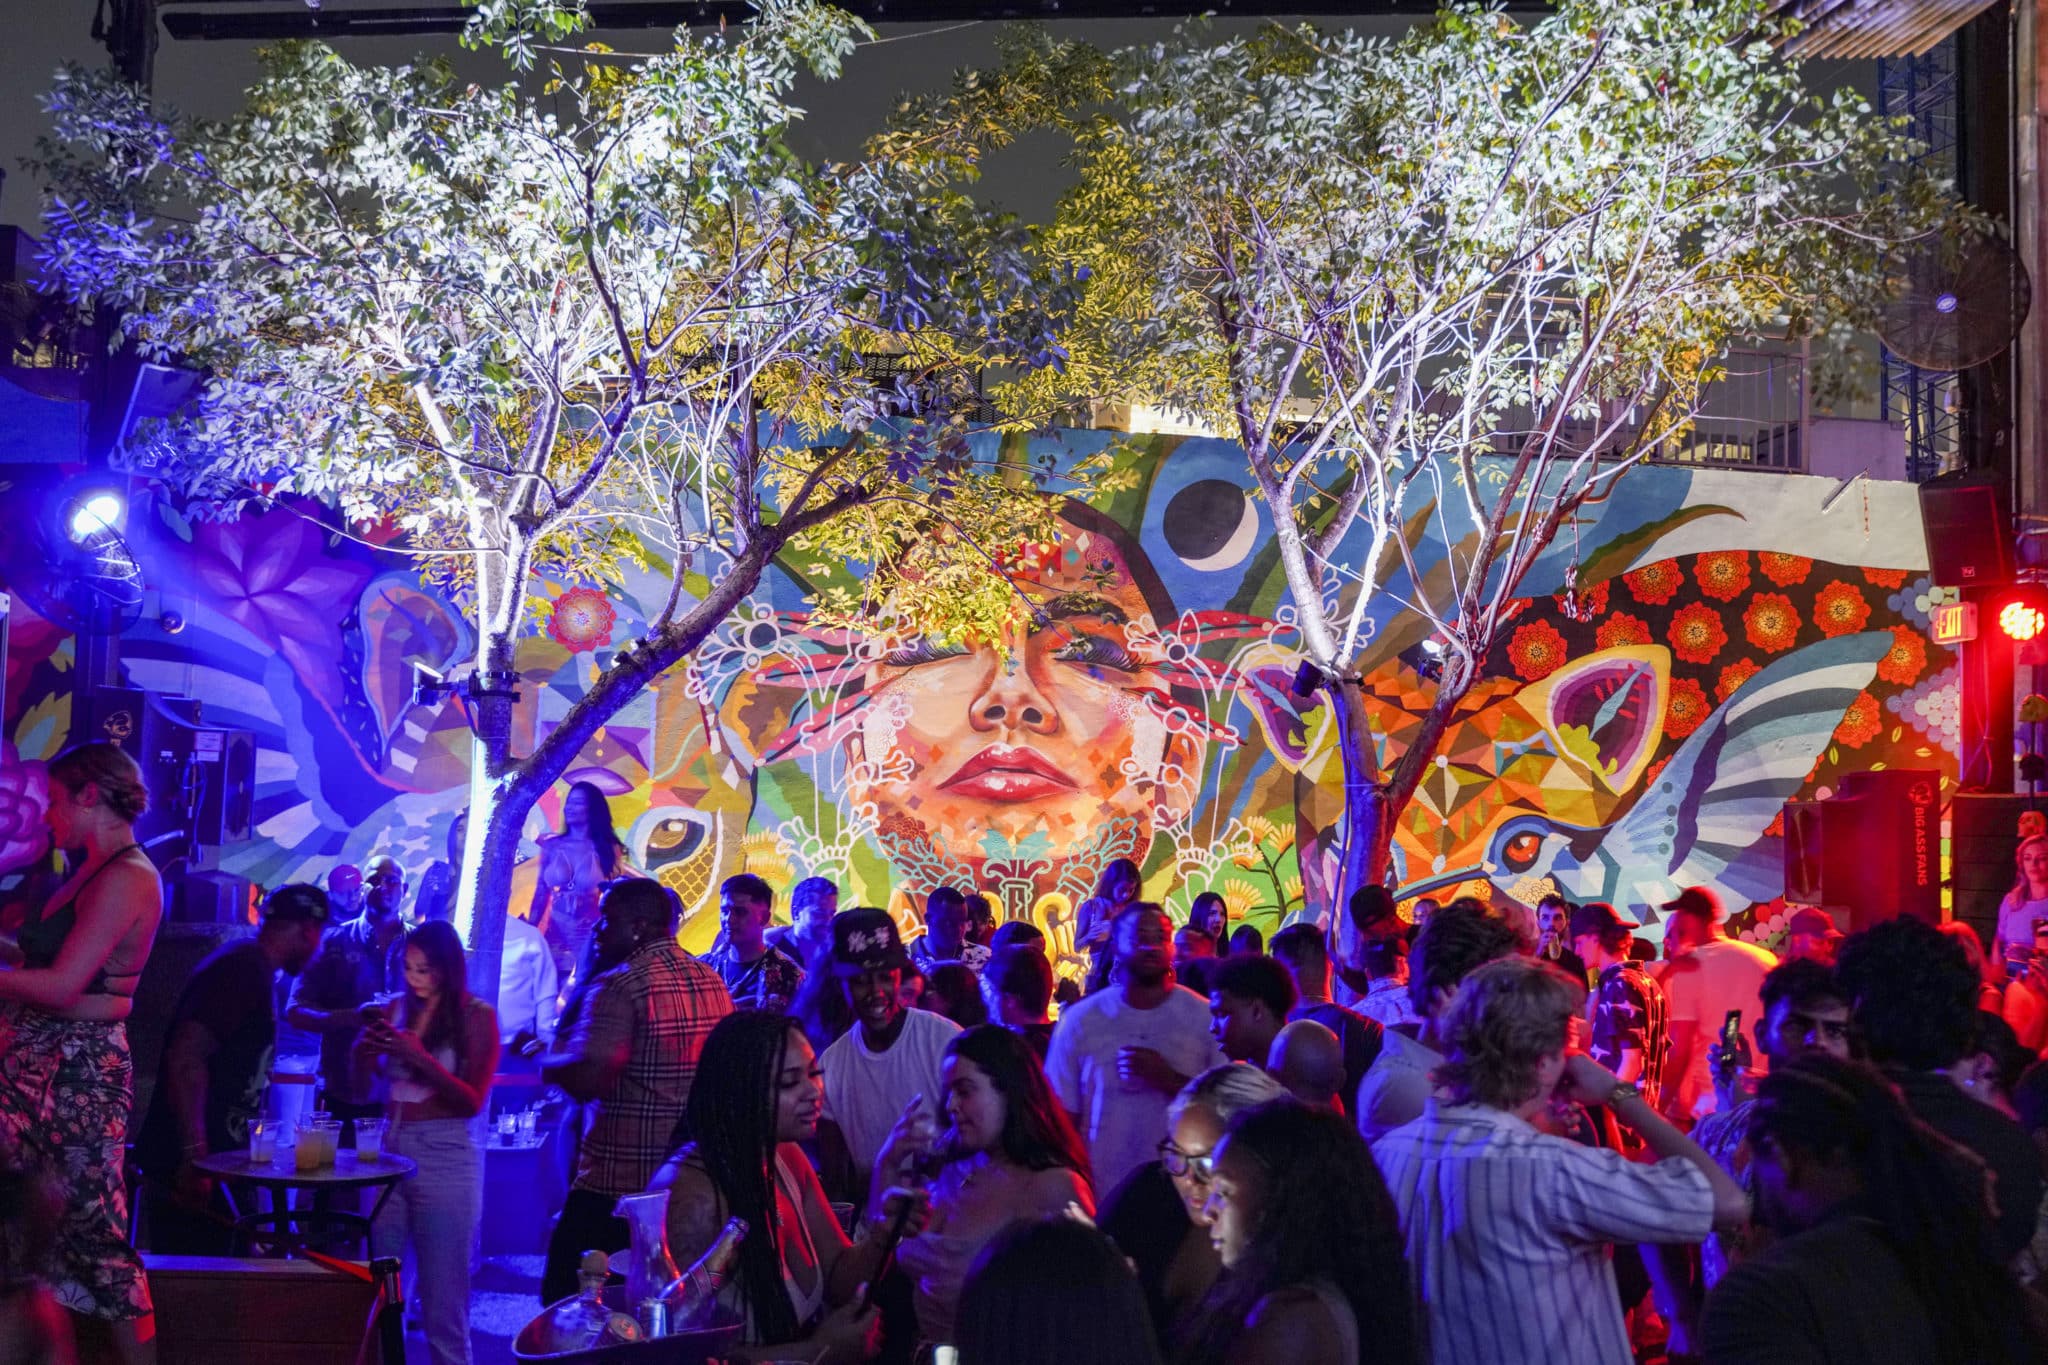 A vibrant party in Pilo’s Tequila Garden